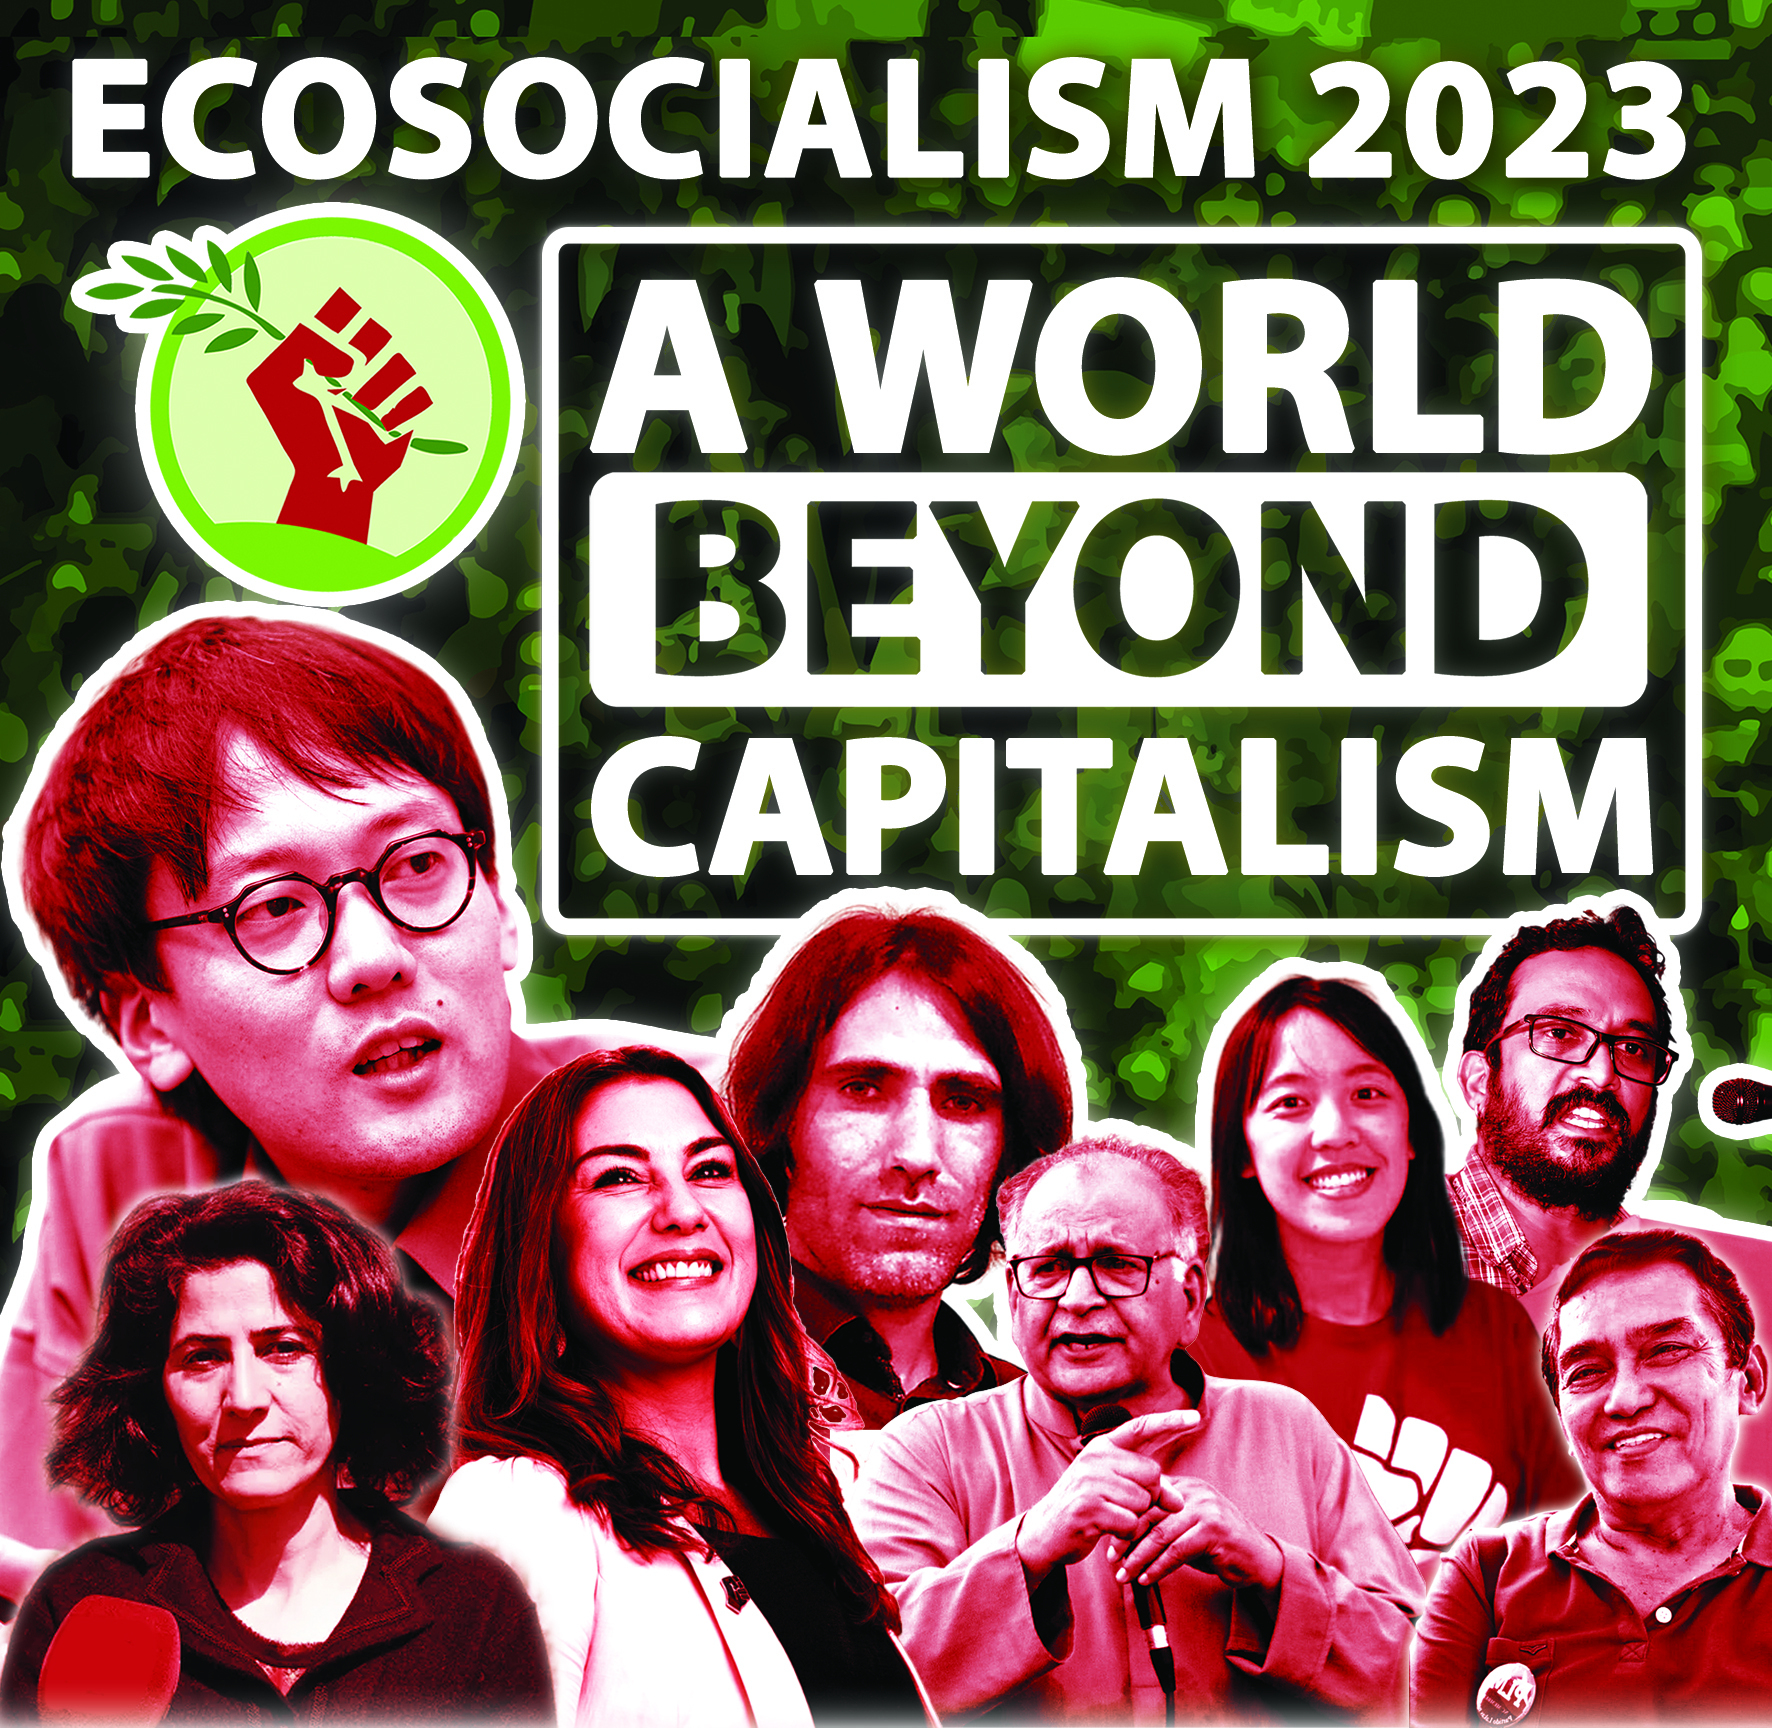 New speakers announced for Ecosocialism 2023 conference